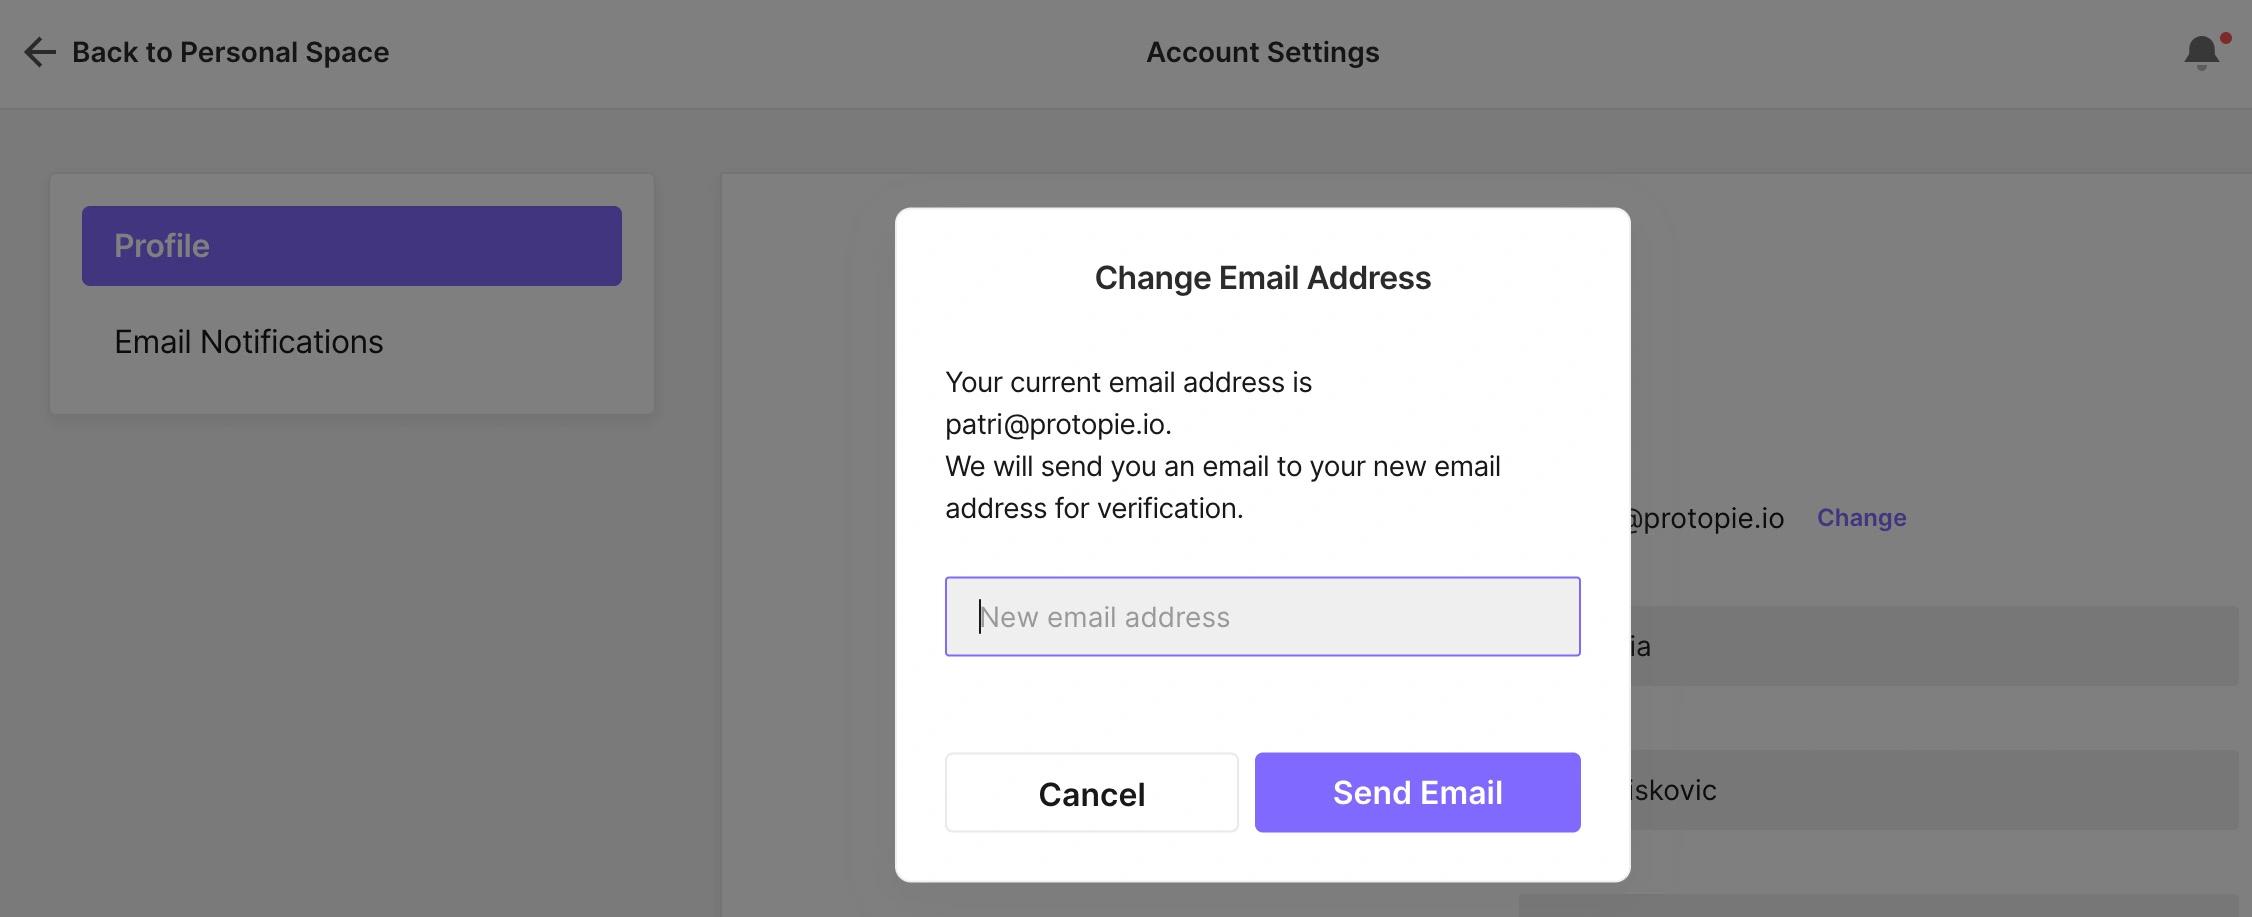 changing the email address of a ProtoPie account